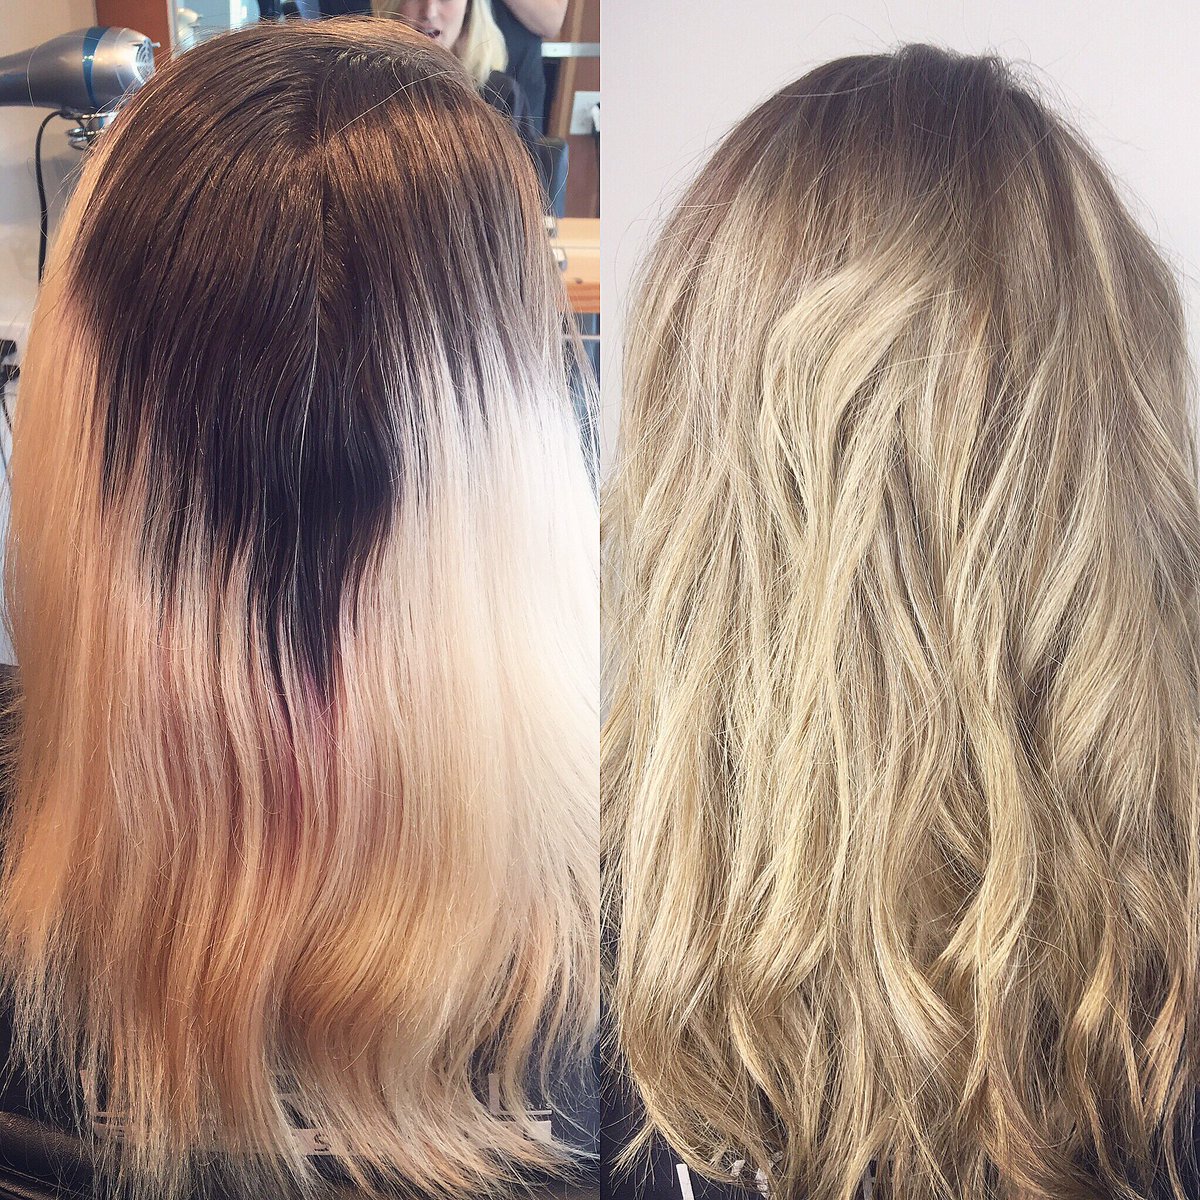 Hype Hair Studio On Twitter Transformation Tuesday Softening